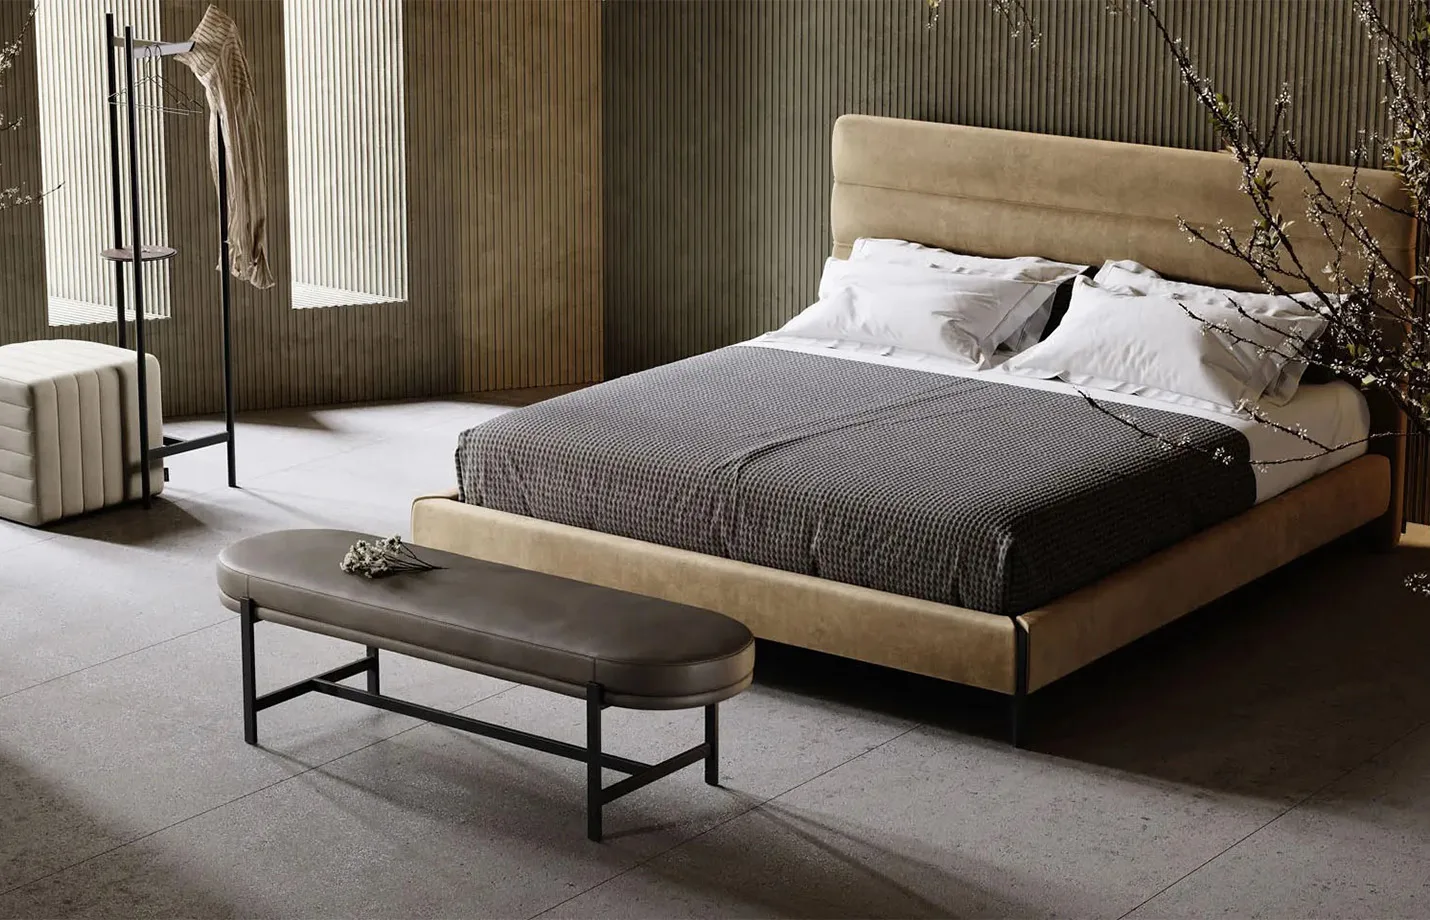 Colbert bench with Yumi bed 2